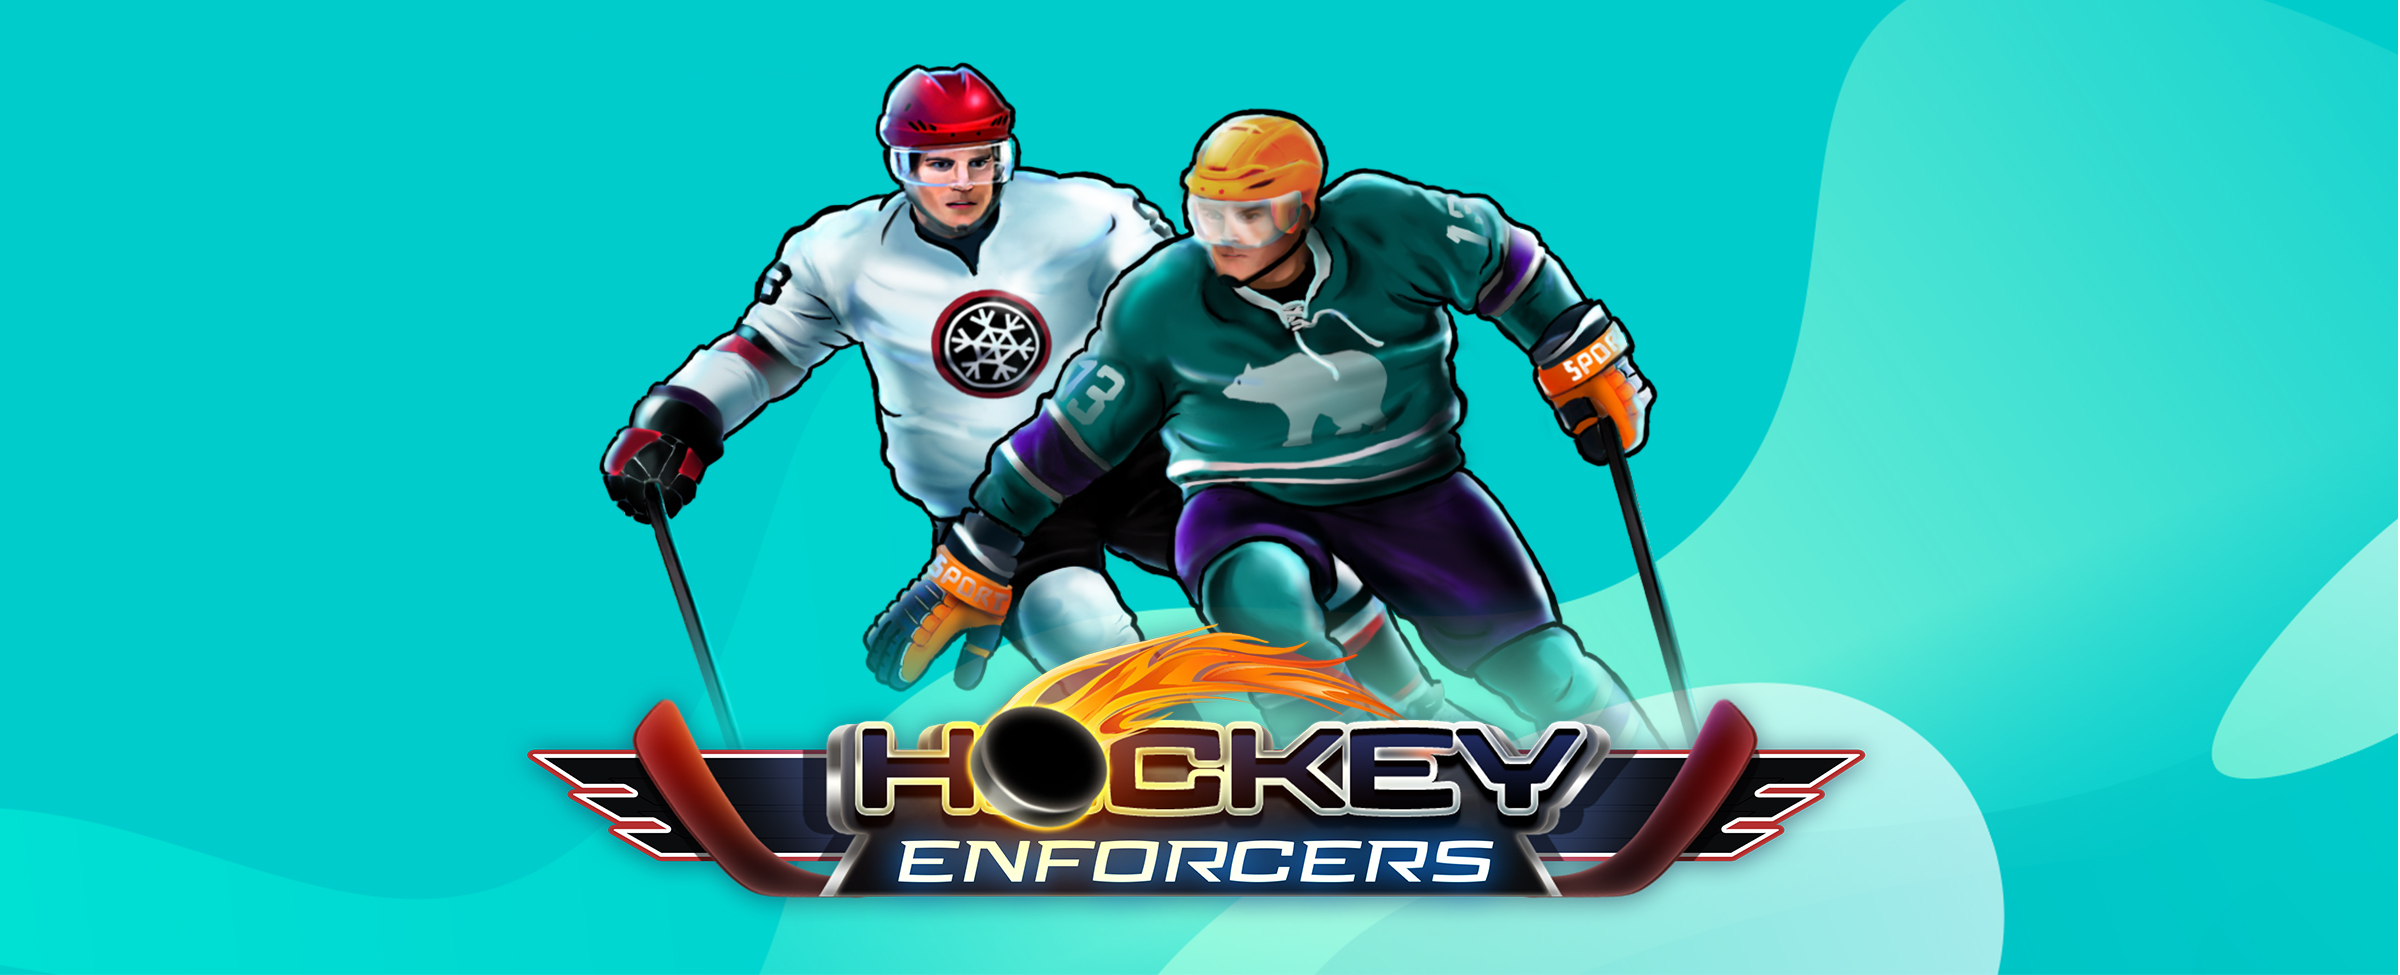 If you love Gridiron Glory, you'll really love Hockey Enforcers. Swap the grass for the ice, pad up and let's go!